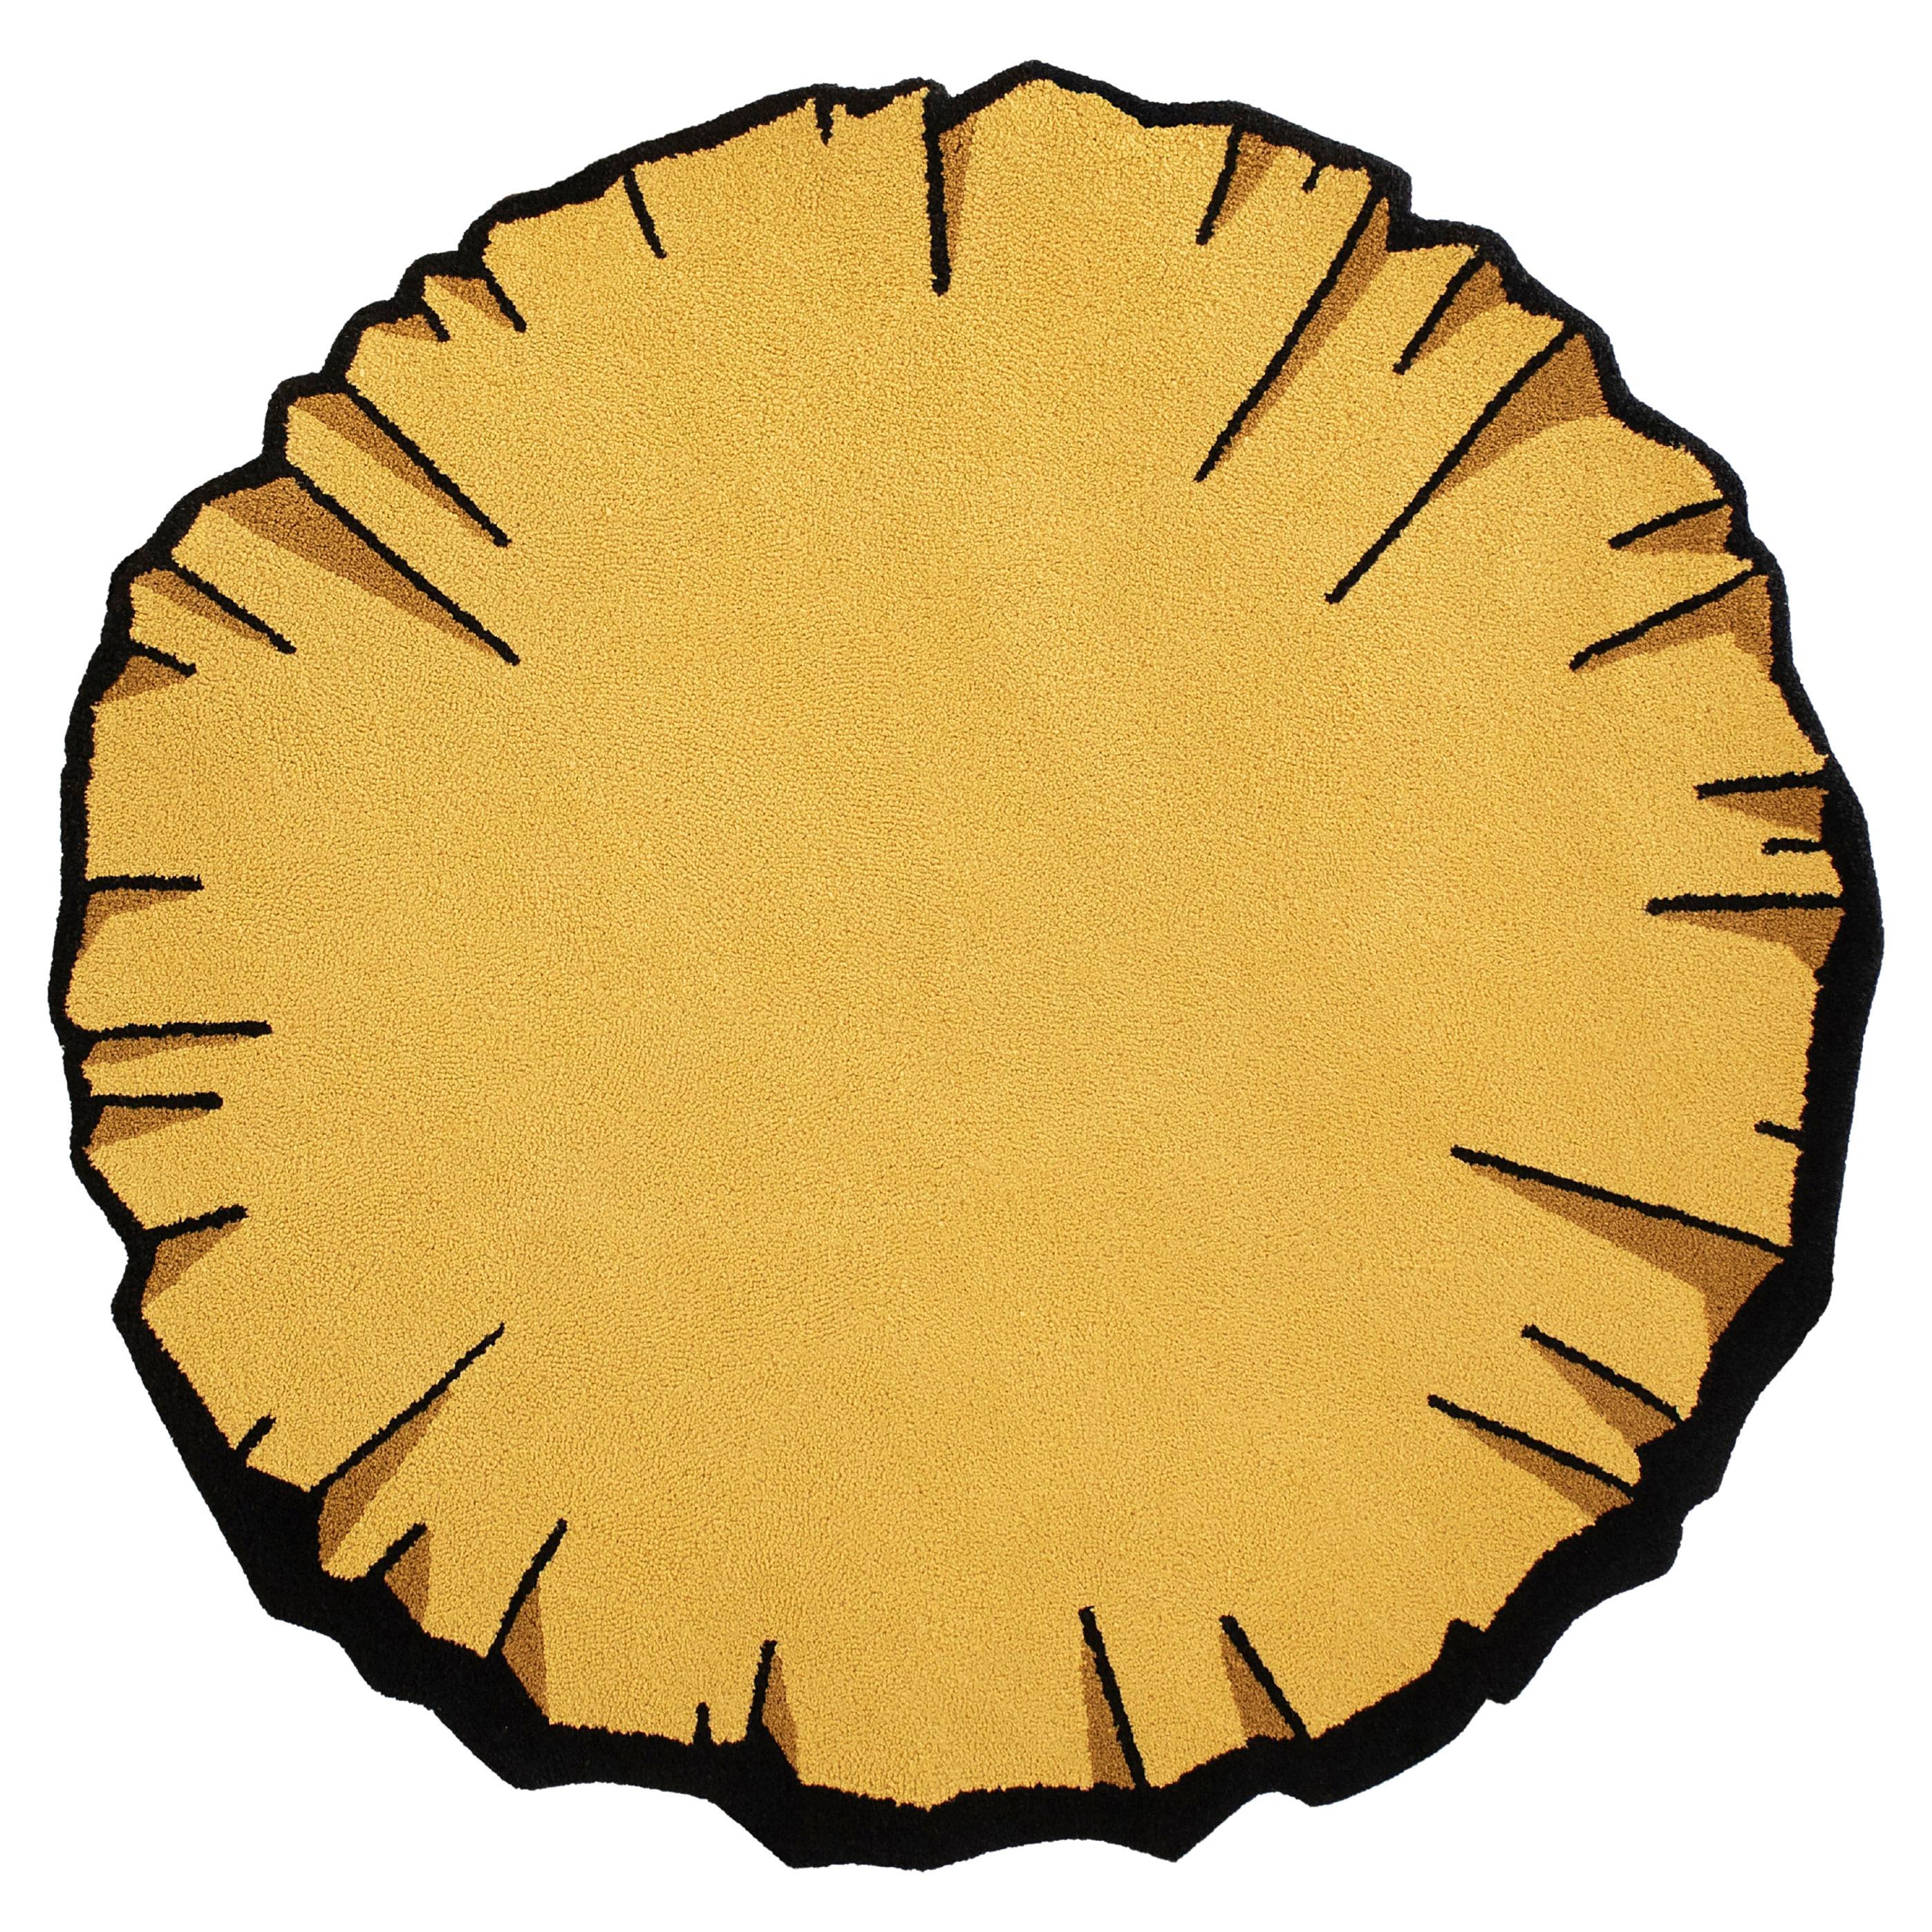 Round Yellow Crumpled Rug from Graffiti Collection by Paulo Kobylka